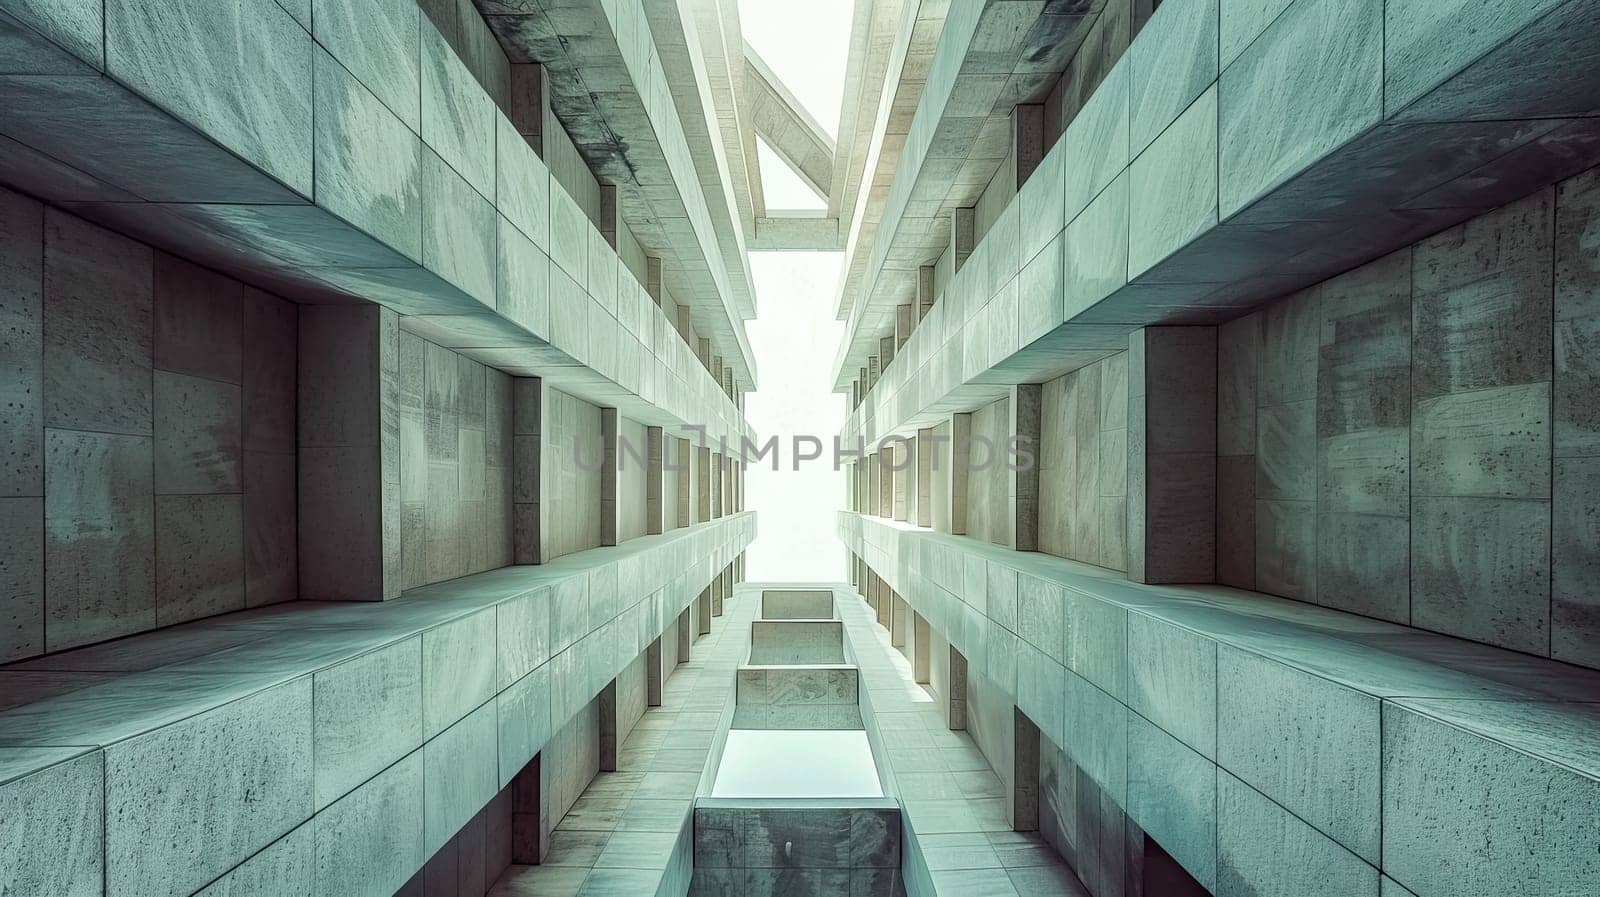 Modern architectural symmetry in urban building by Edophoto